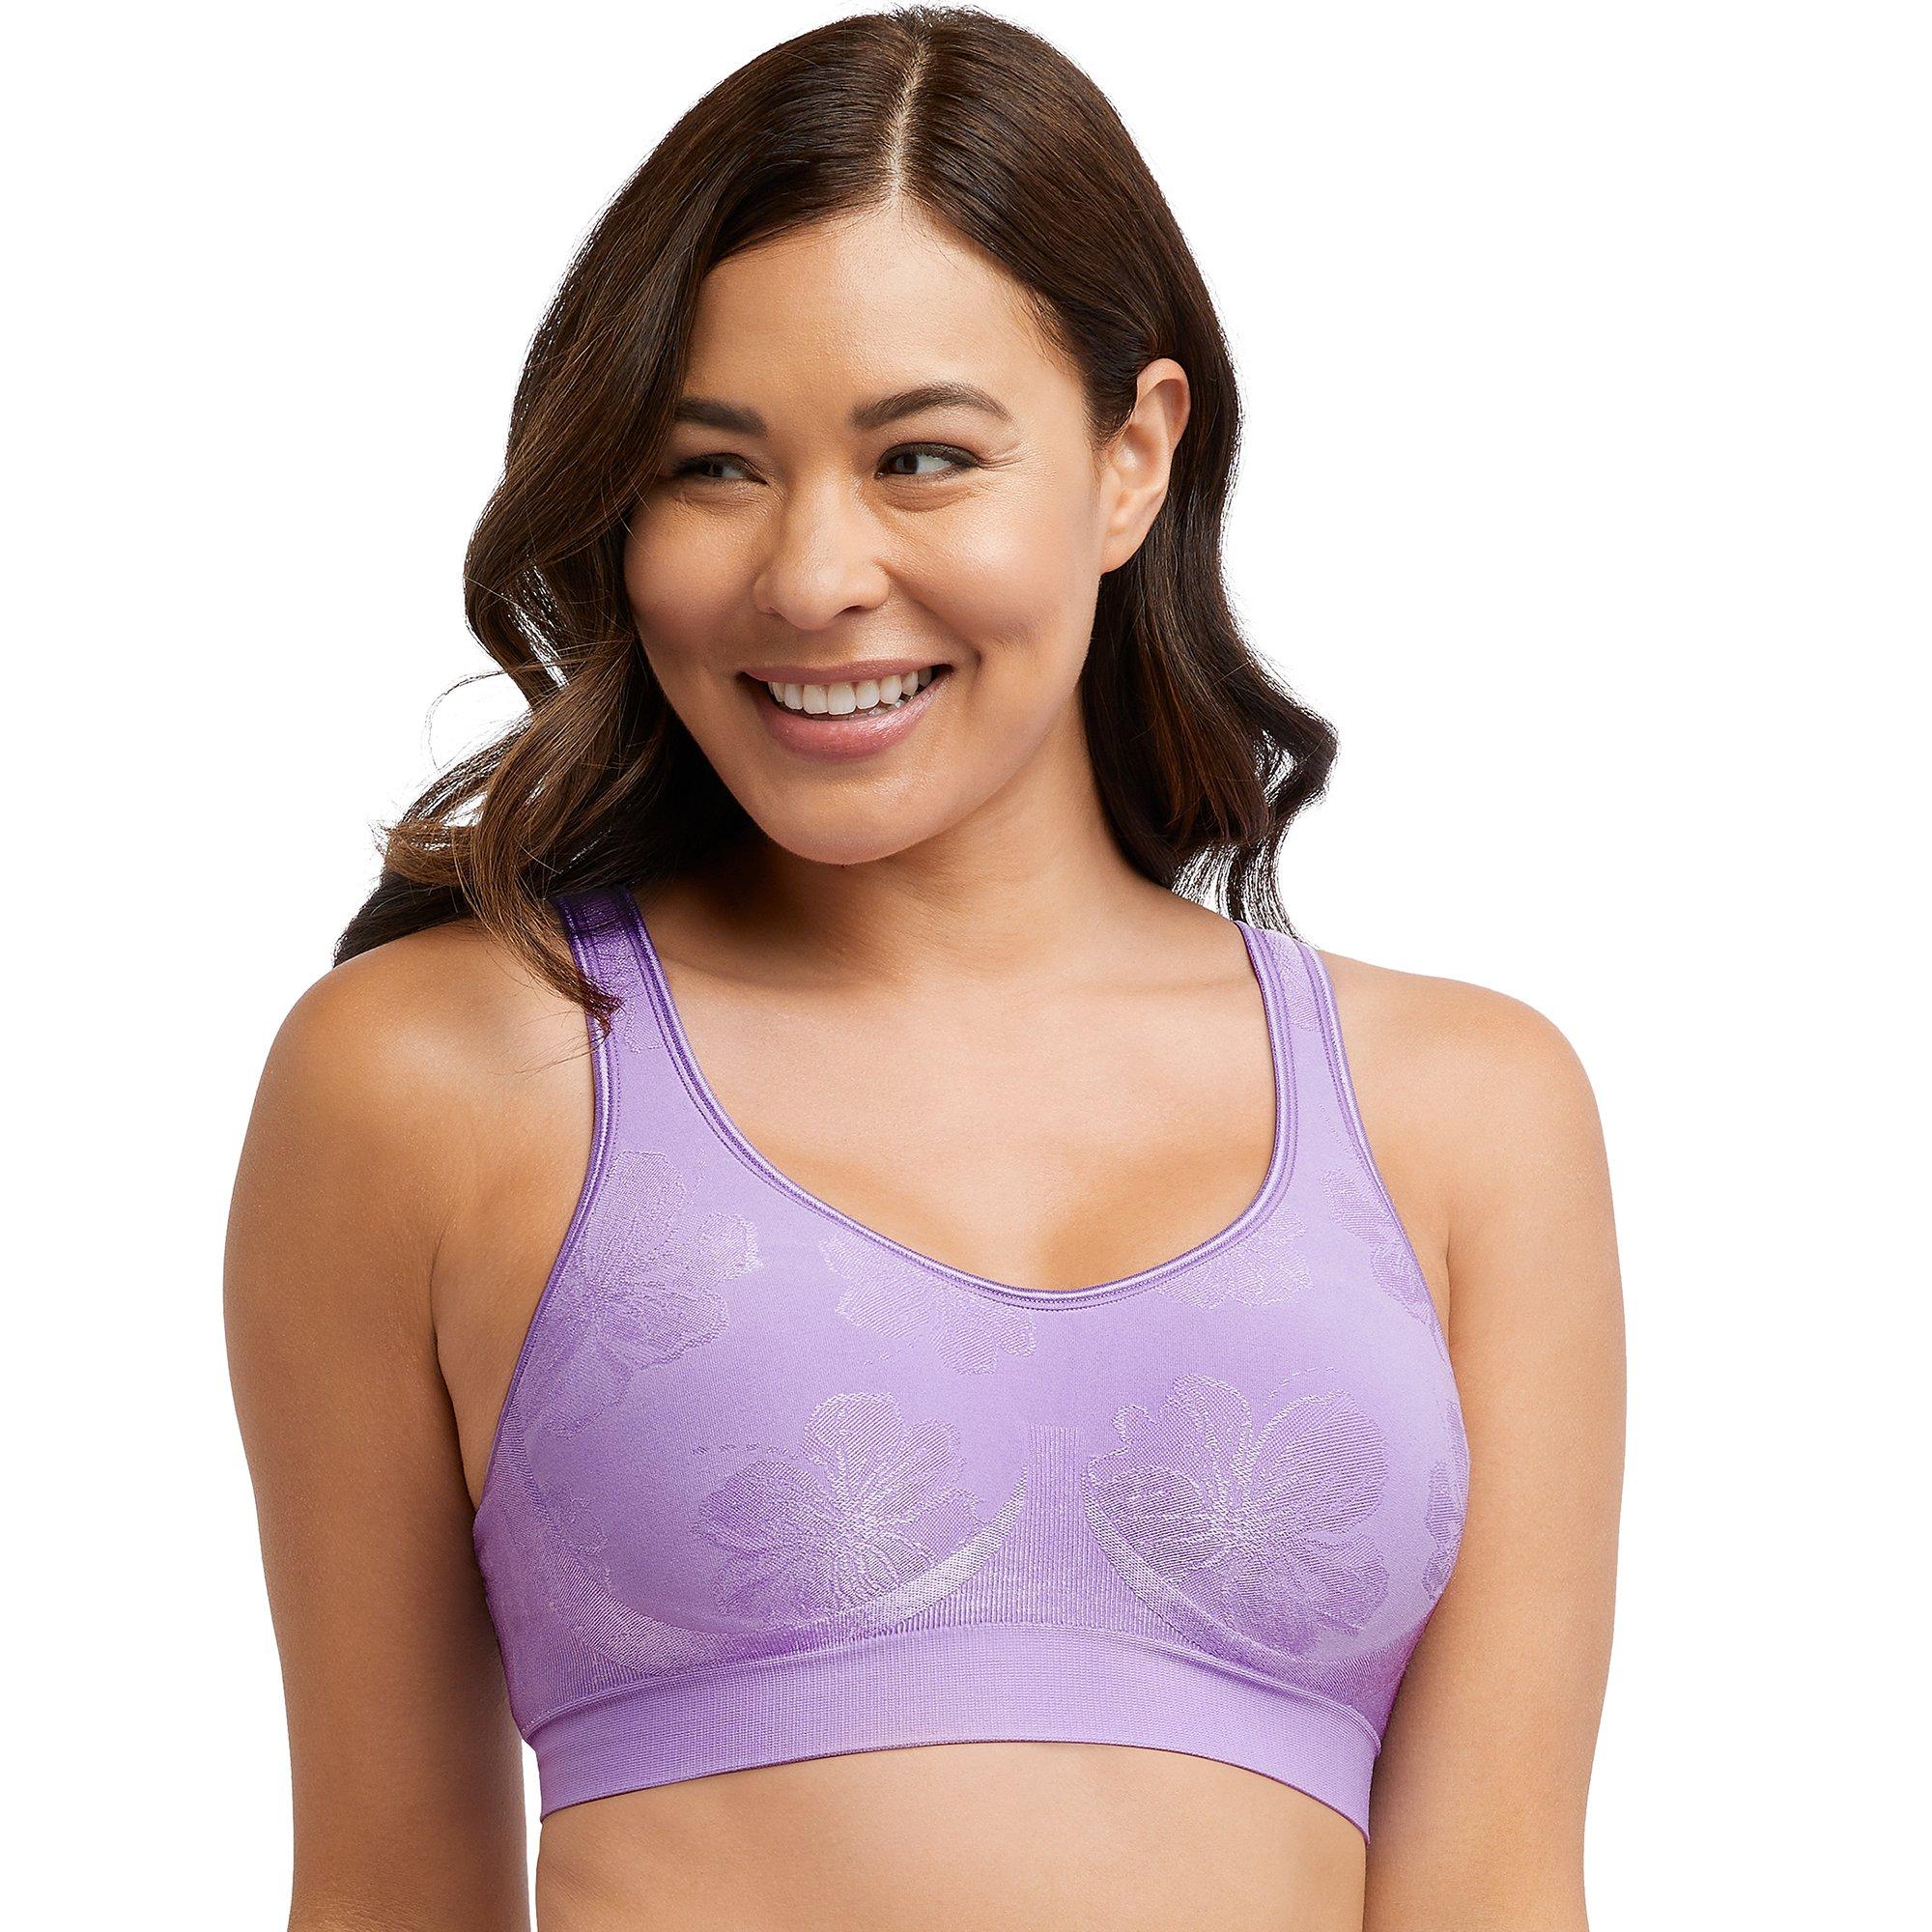 Bali Women's Comfort Revolution Ultimate Wire-Free Support T-Shirt Bra -  DF3462 2XL Tinted Lavender